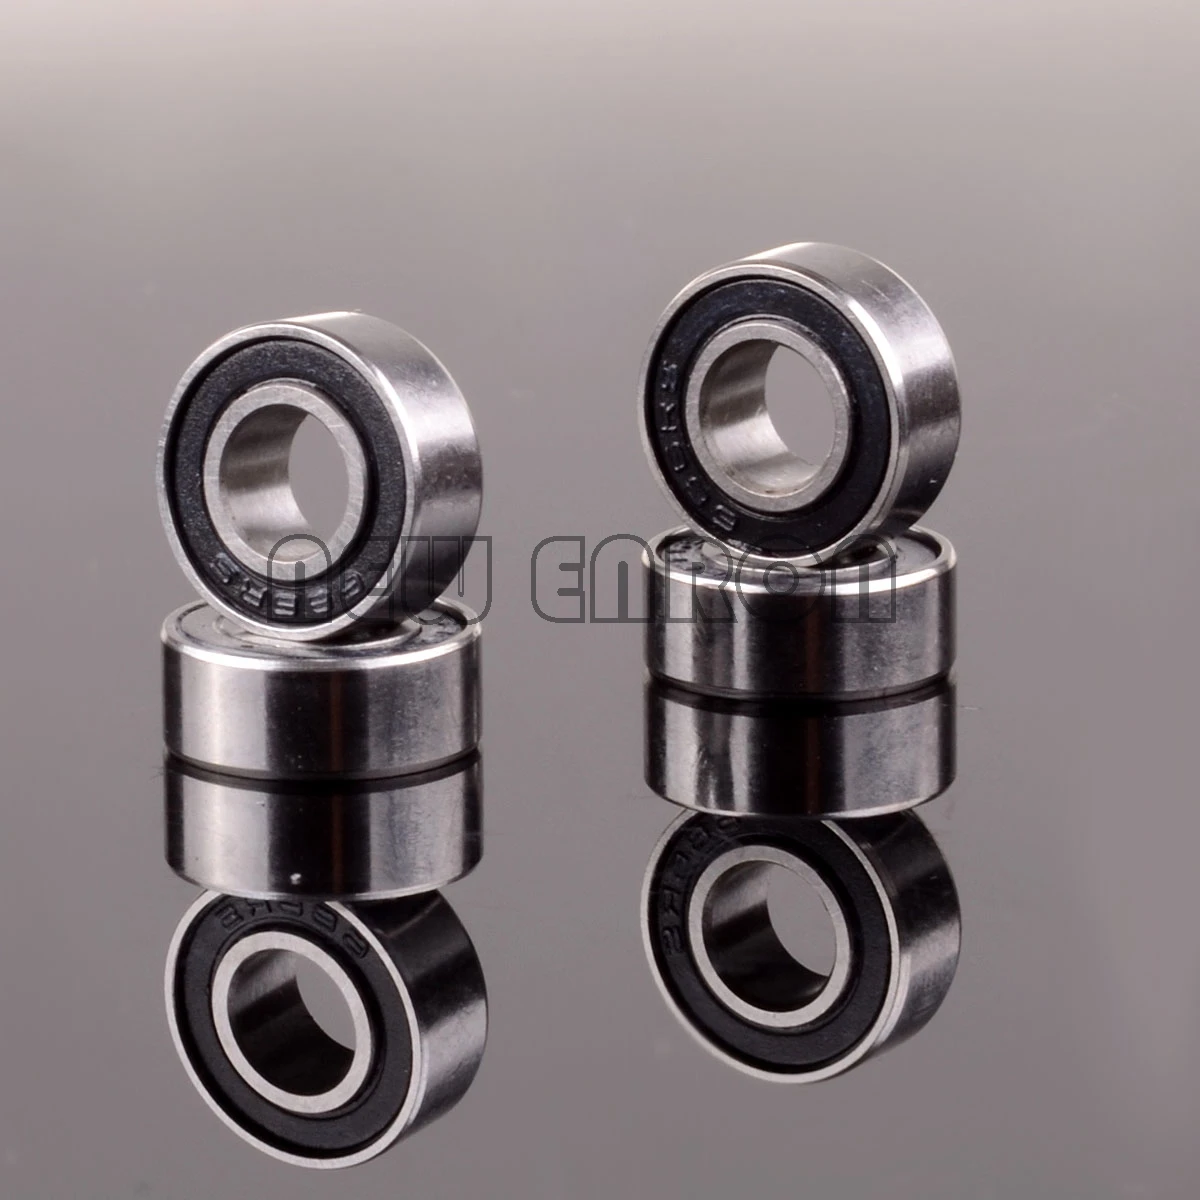 

NEW ENRON 4PCS 686RS 686-2RS Black Rubber Sealed Ball Bearing Seal 2RS 6*13*5 MM 6x13x5mm Deep Groove RC Model Car